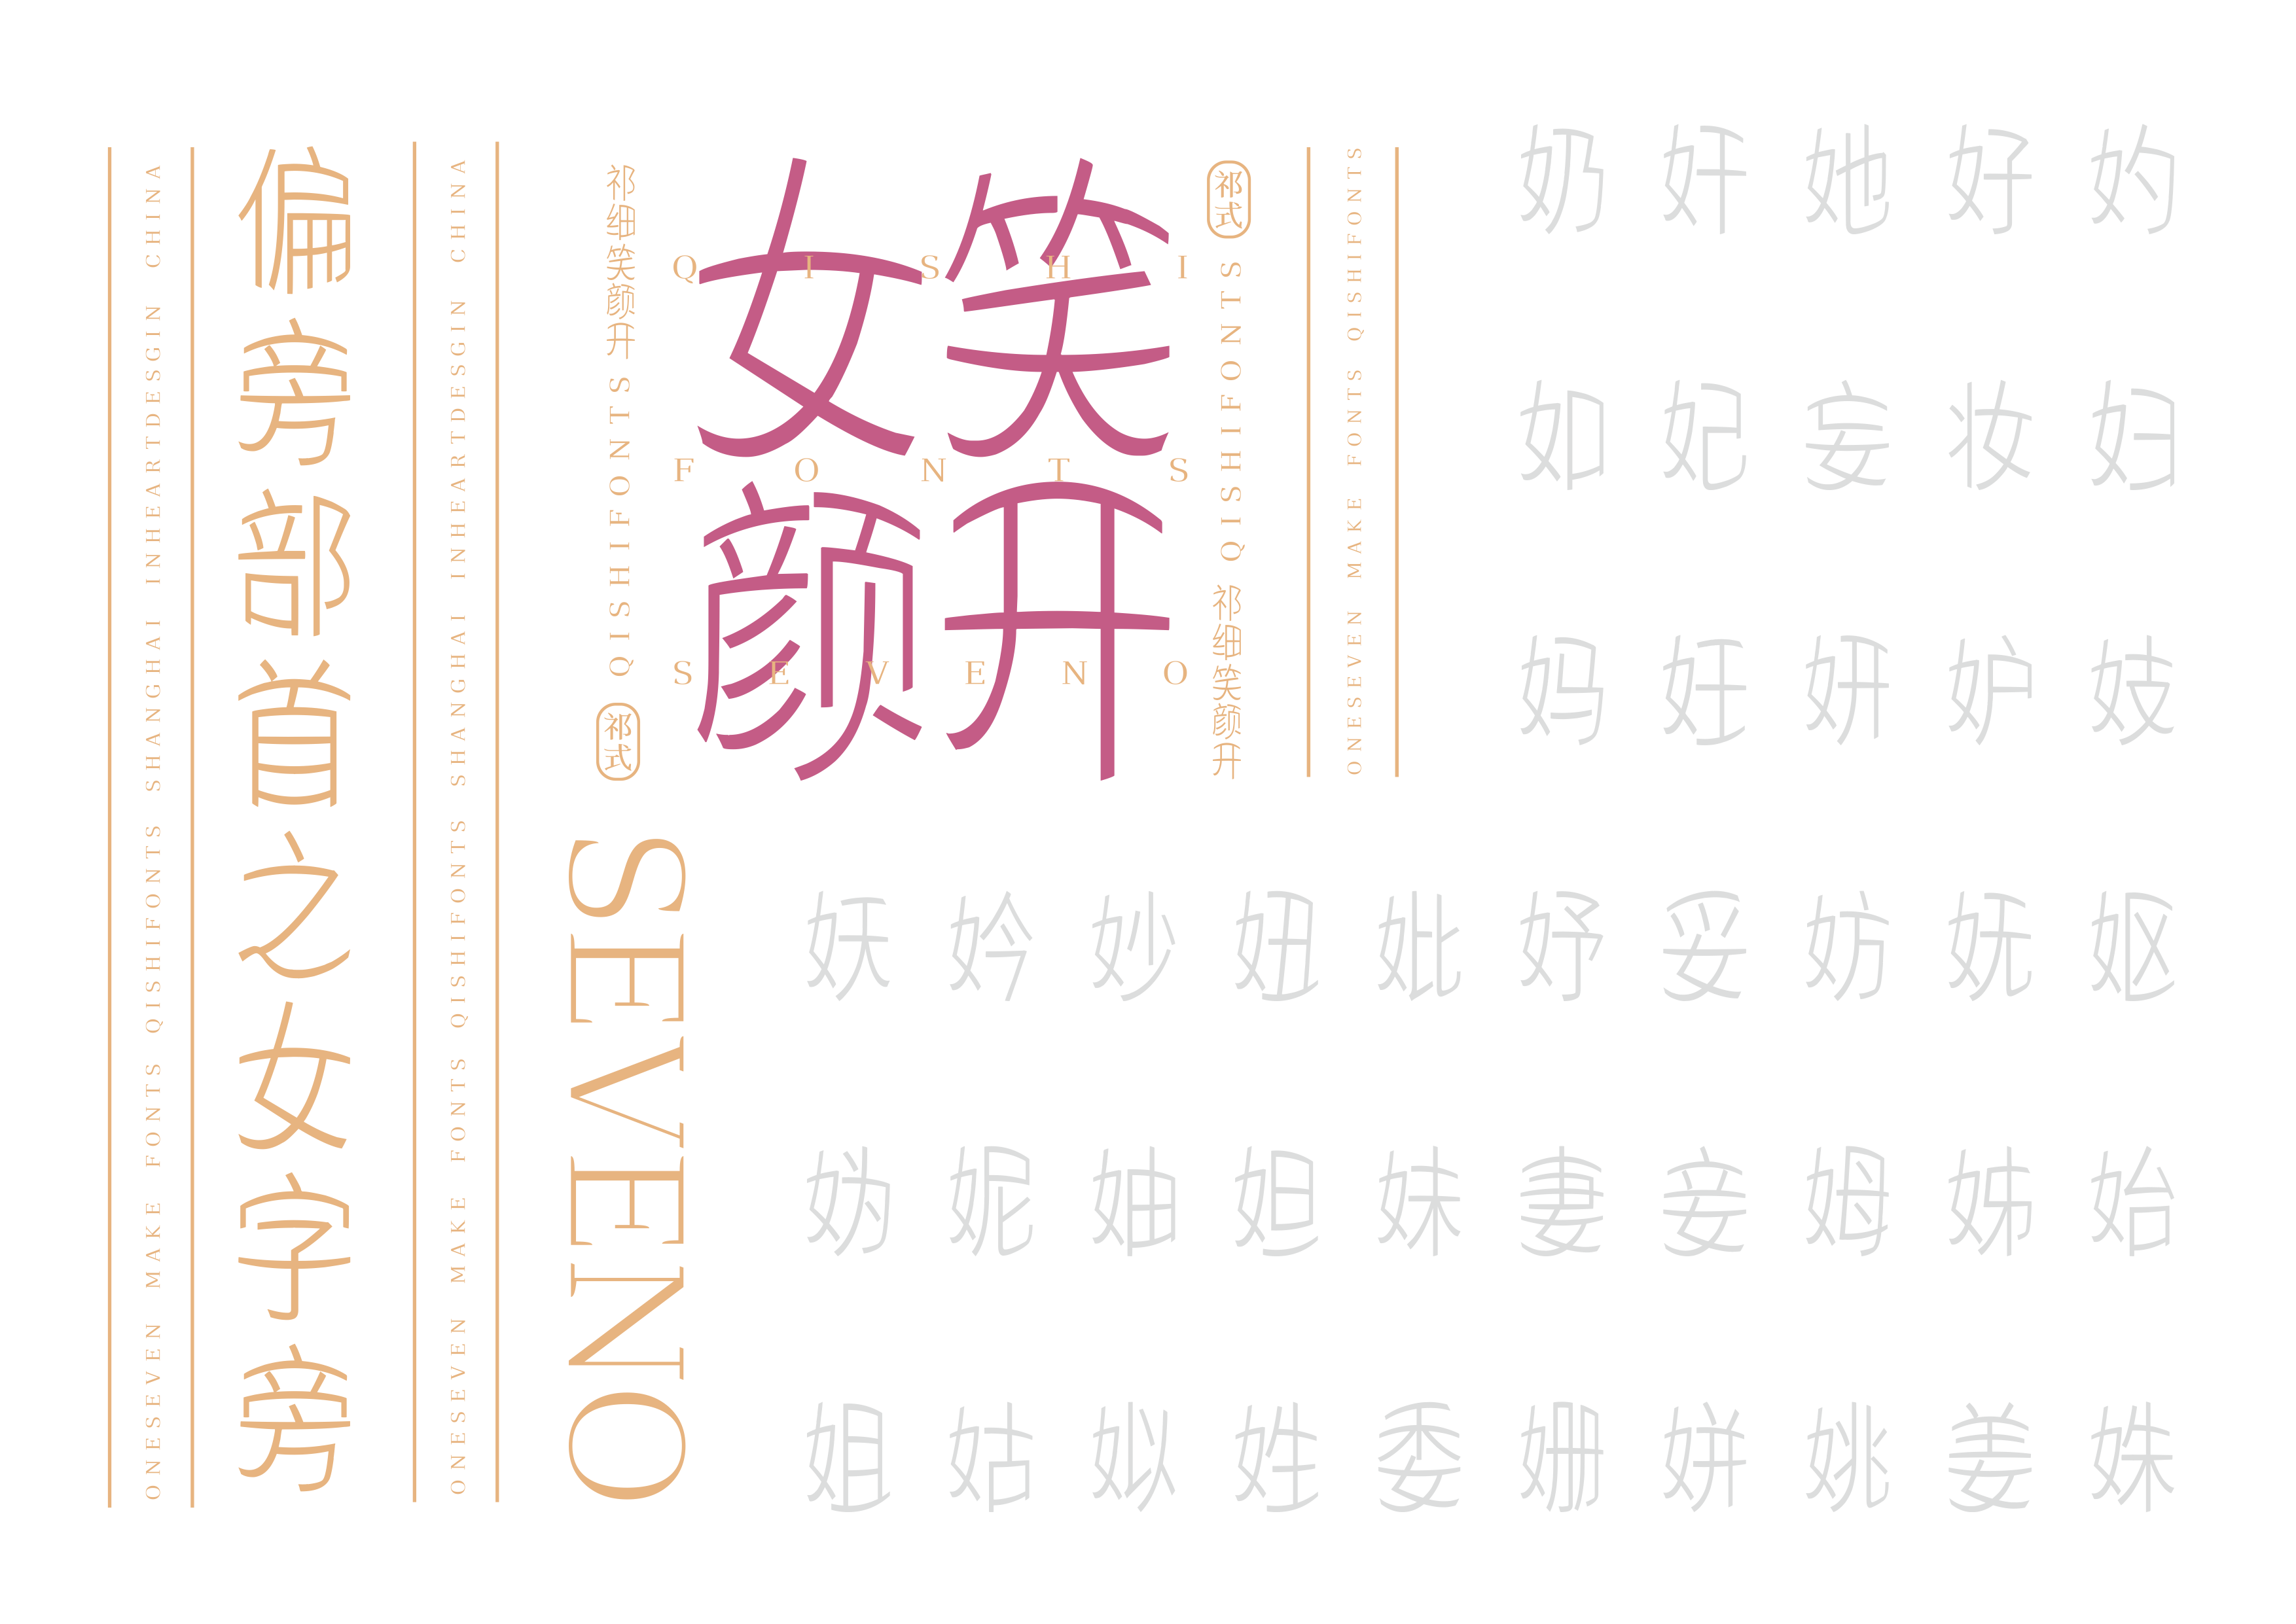 30P Collection of the latest Chinese font design schemes in 2021 #.105